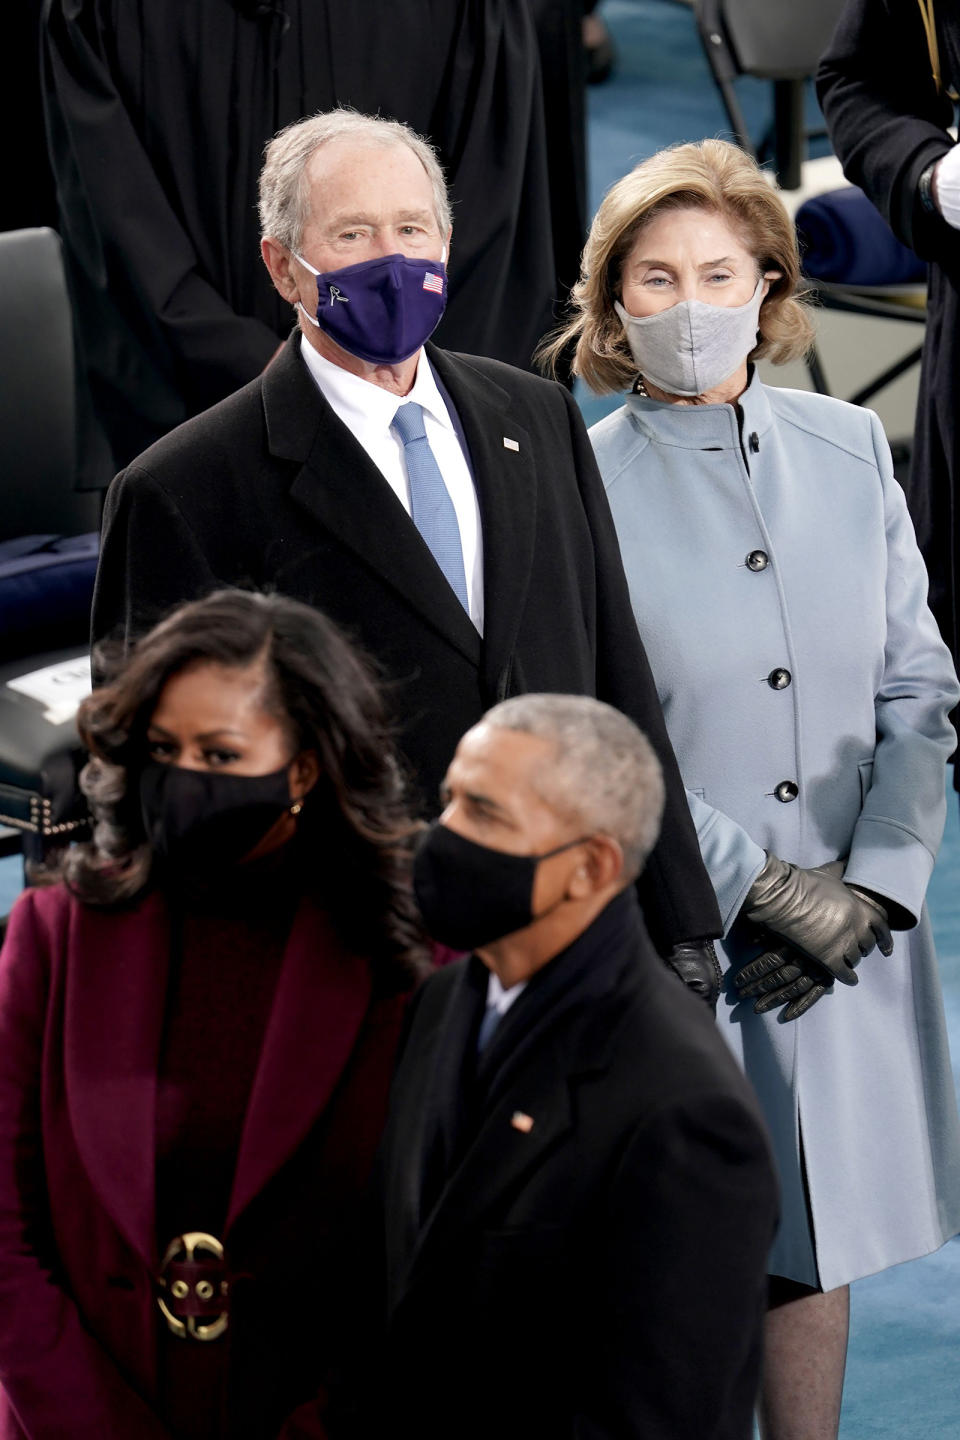 Former President George W. Bush, Laura Bush, former President Barack Obama and Michelle Obama are seen prior to the 59th Presidential Inauguration.<span class="copyright">Shutterstock</span>